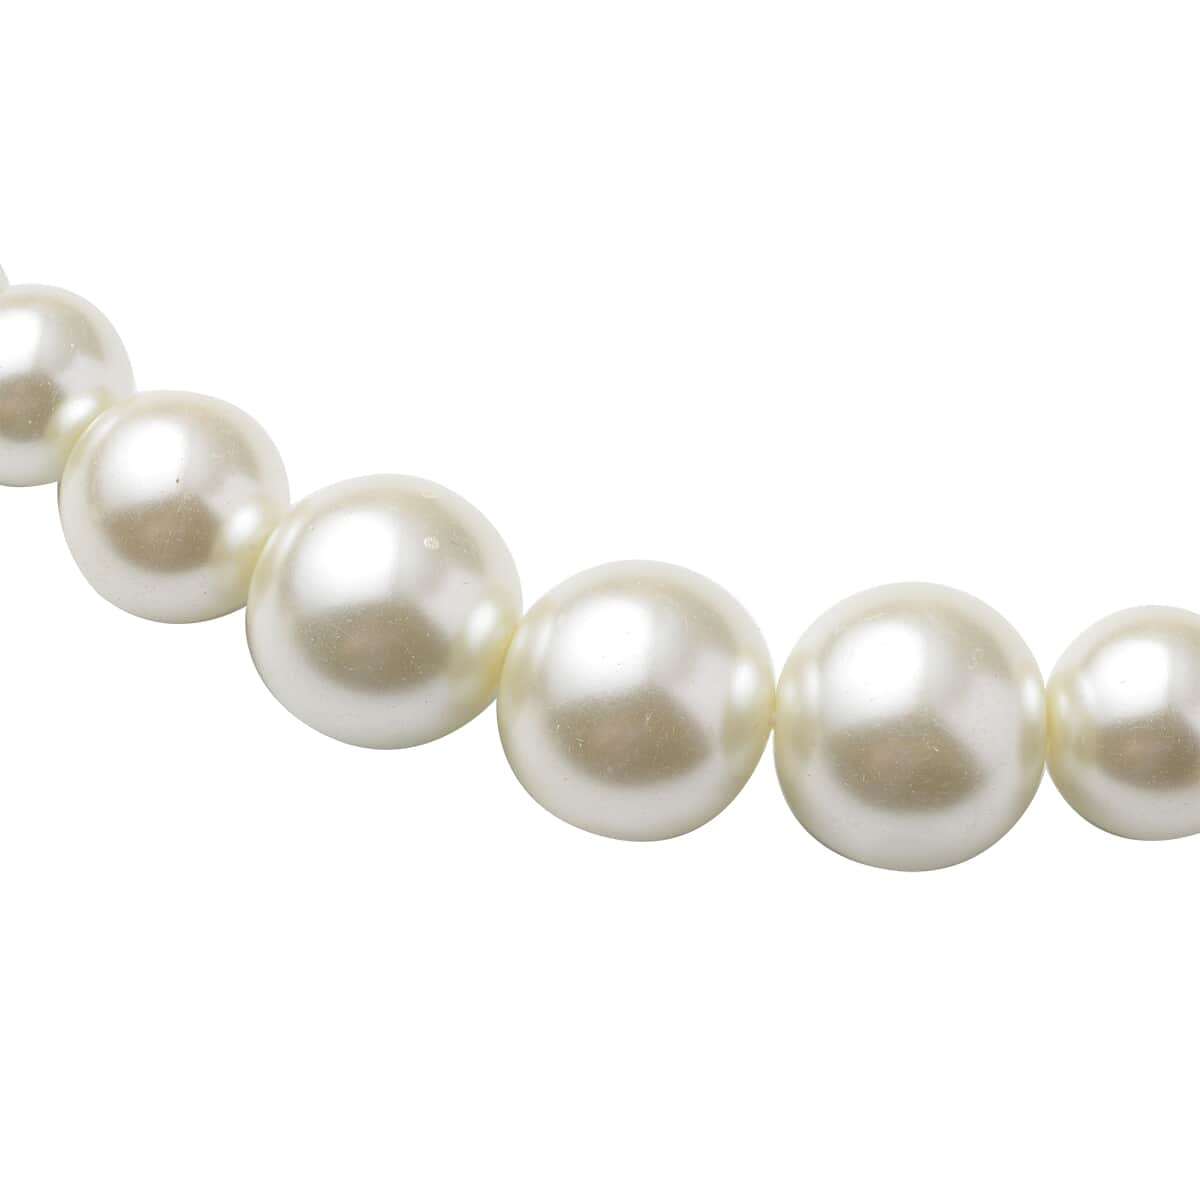 Set of 2 Simulated White Pearl Necklace 20-22 Inches and Earrings in Silvertone and Stainless Steel image number 3